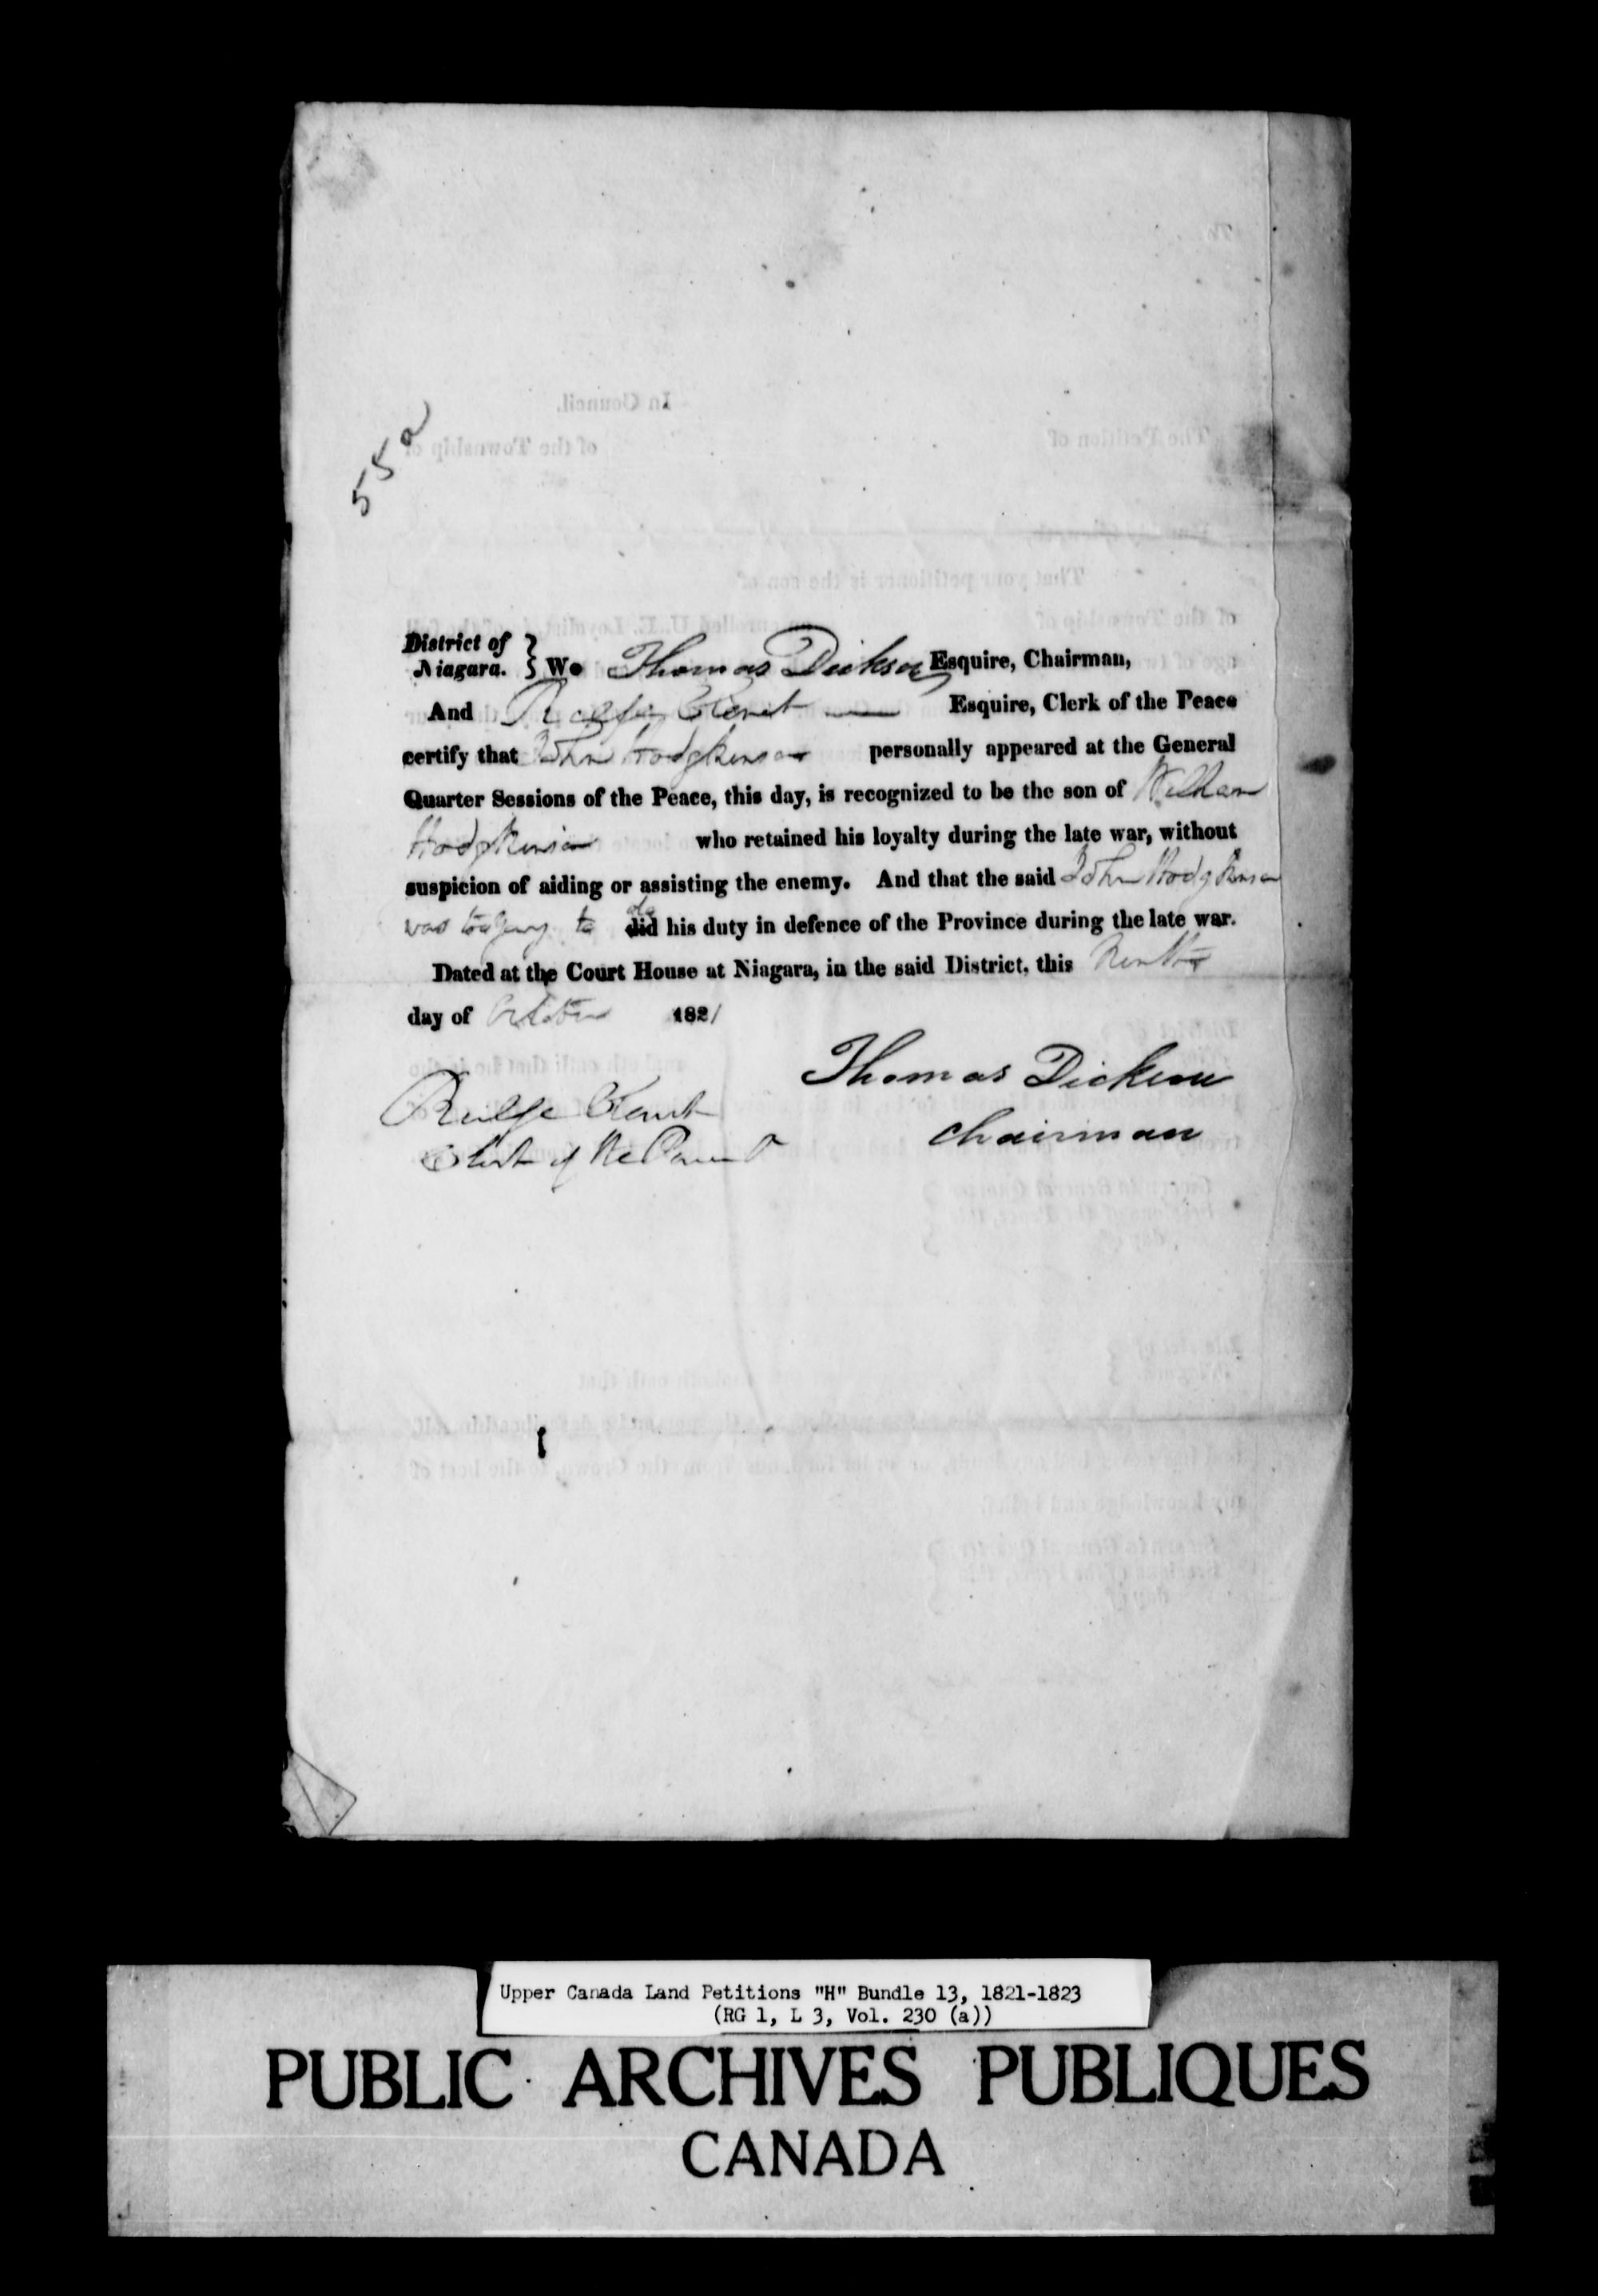 Title: Upper Canada Land Petitions (1763-1865) - Mikan Number: 205131 - Microform: c-2049